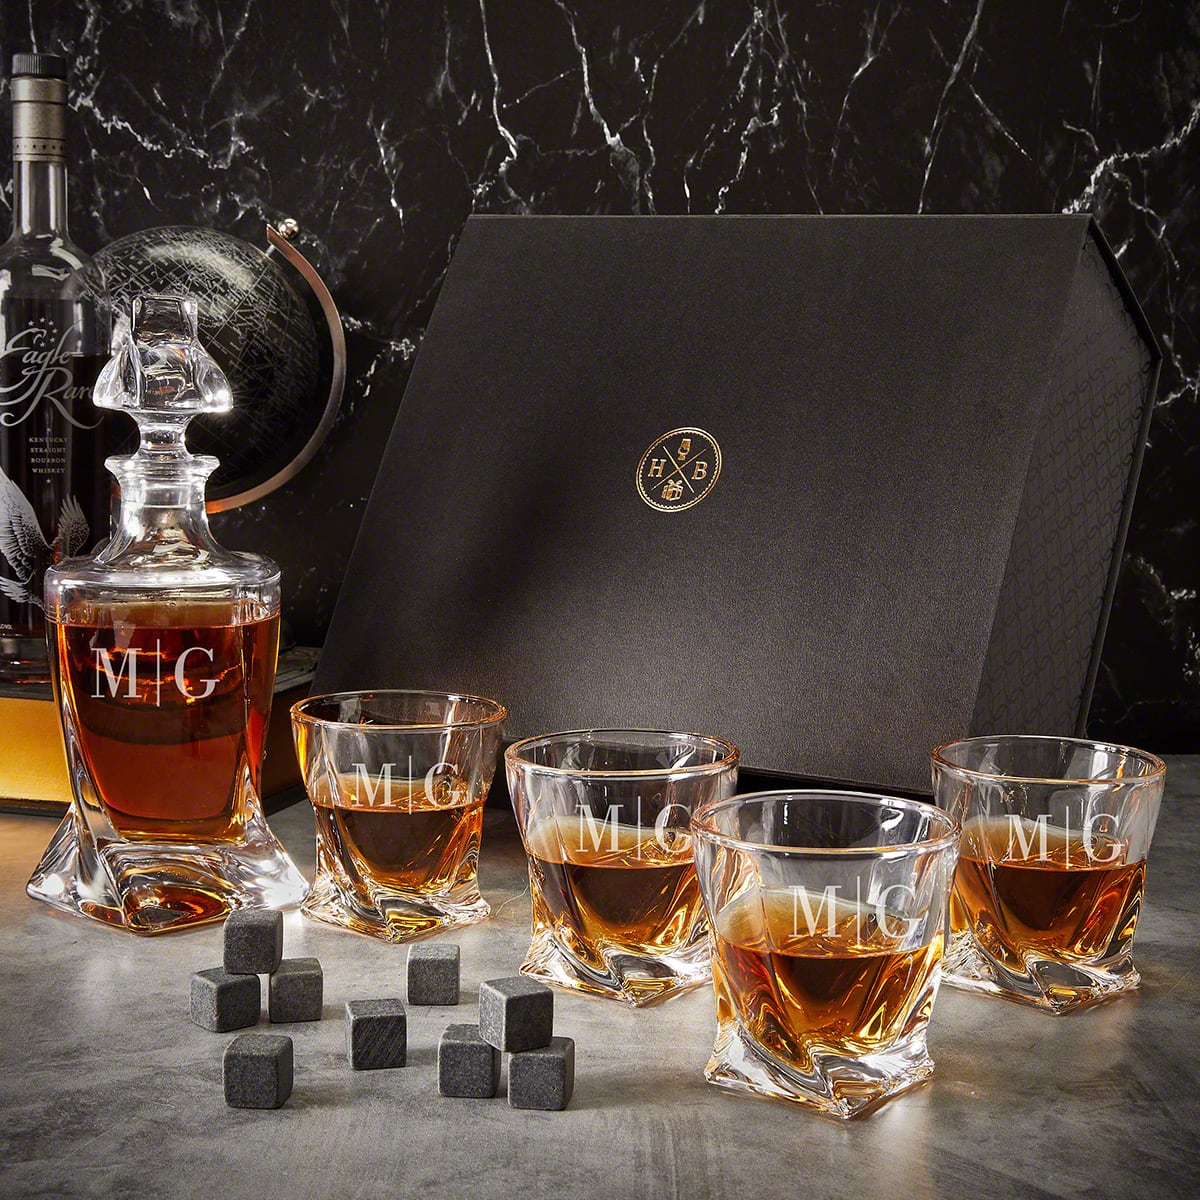 Engraved Bourbon Decanter with Rocks Glasses & Luxury Box Gift Set - 7pc 